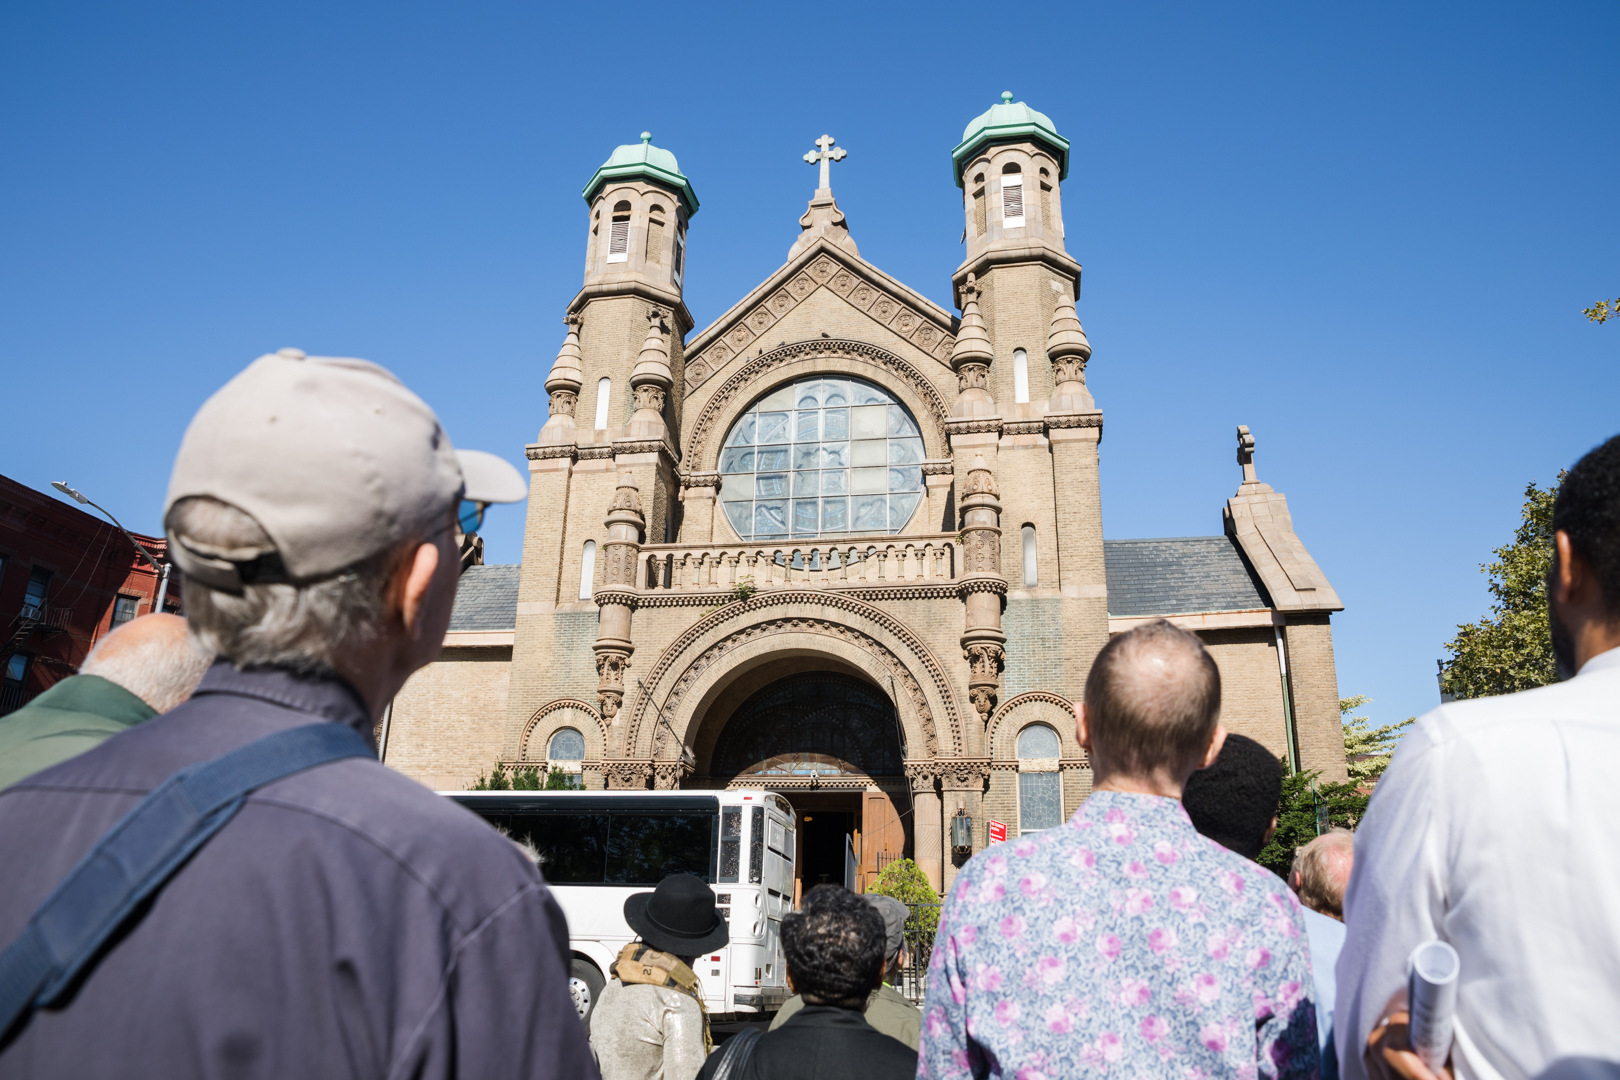 The tour not only showed off some of the borough's noteworthy organs, but also its churches and architecture. Shown is All Saints Episcopal Church. Eagle photo by Paul Frangipane